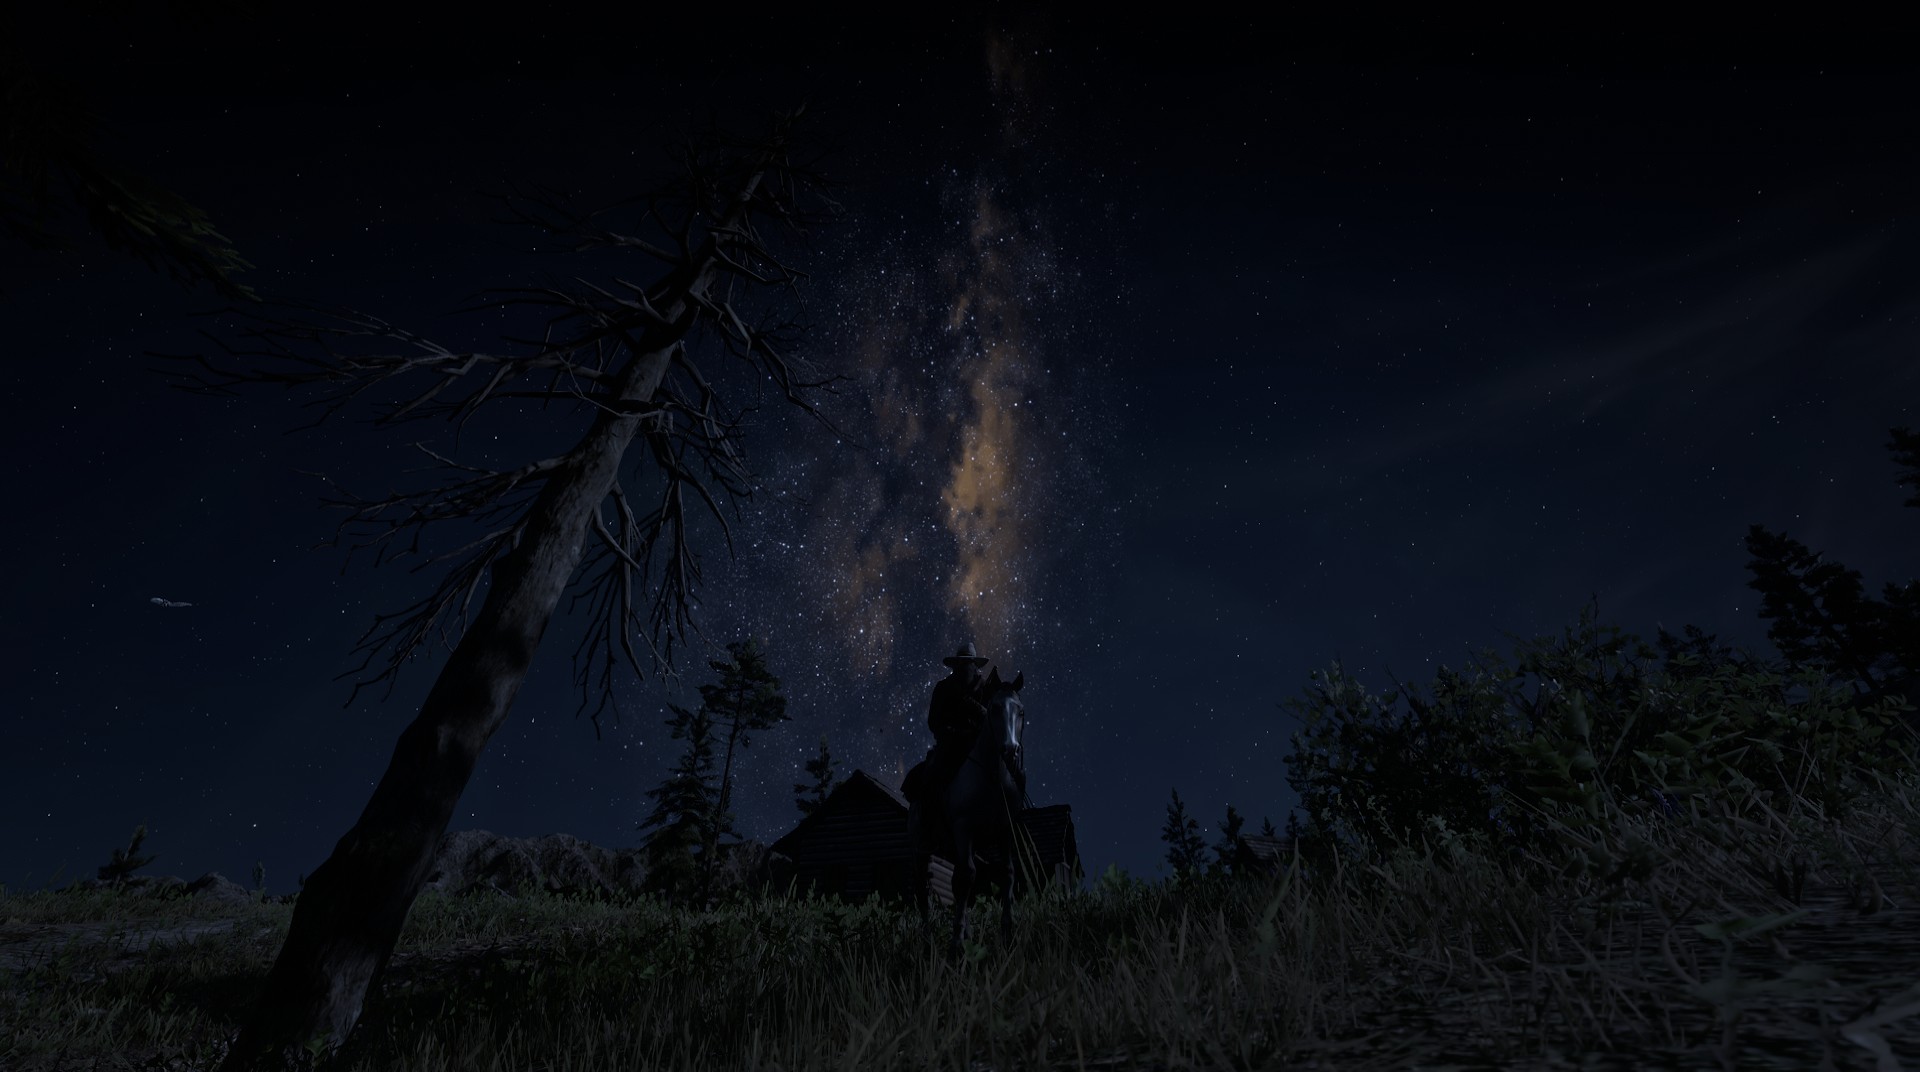 Red Dead Redemption Red Dead Redemption 2 Video Games Screen Shot Nature Stars Trees Horse Cowboys 1920x1072